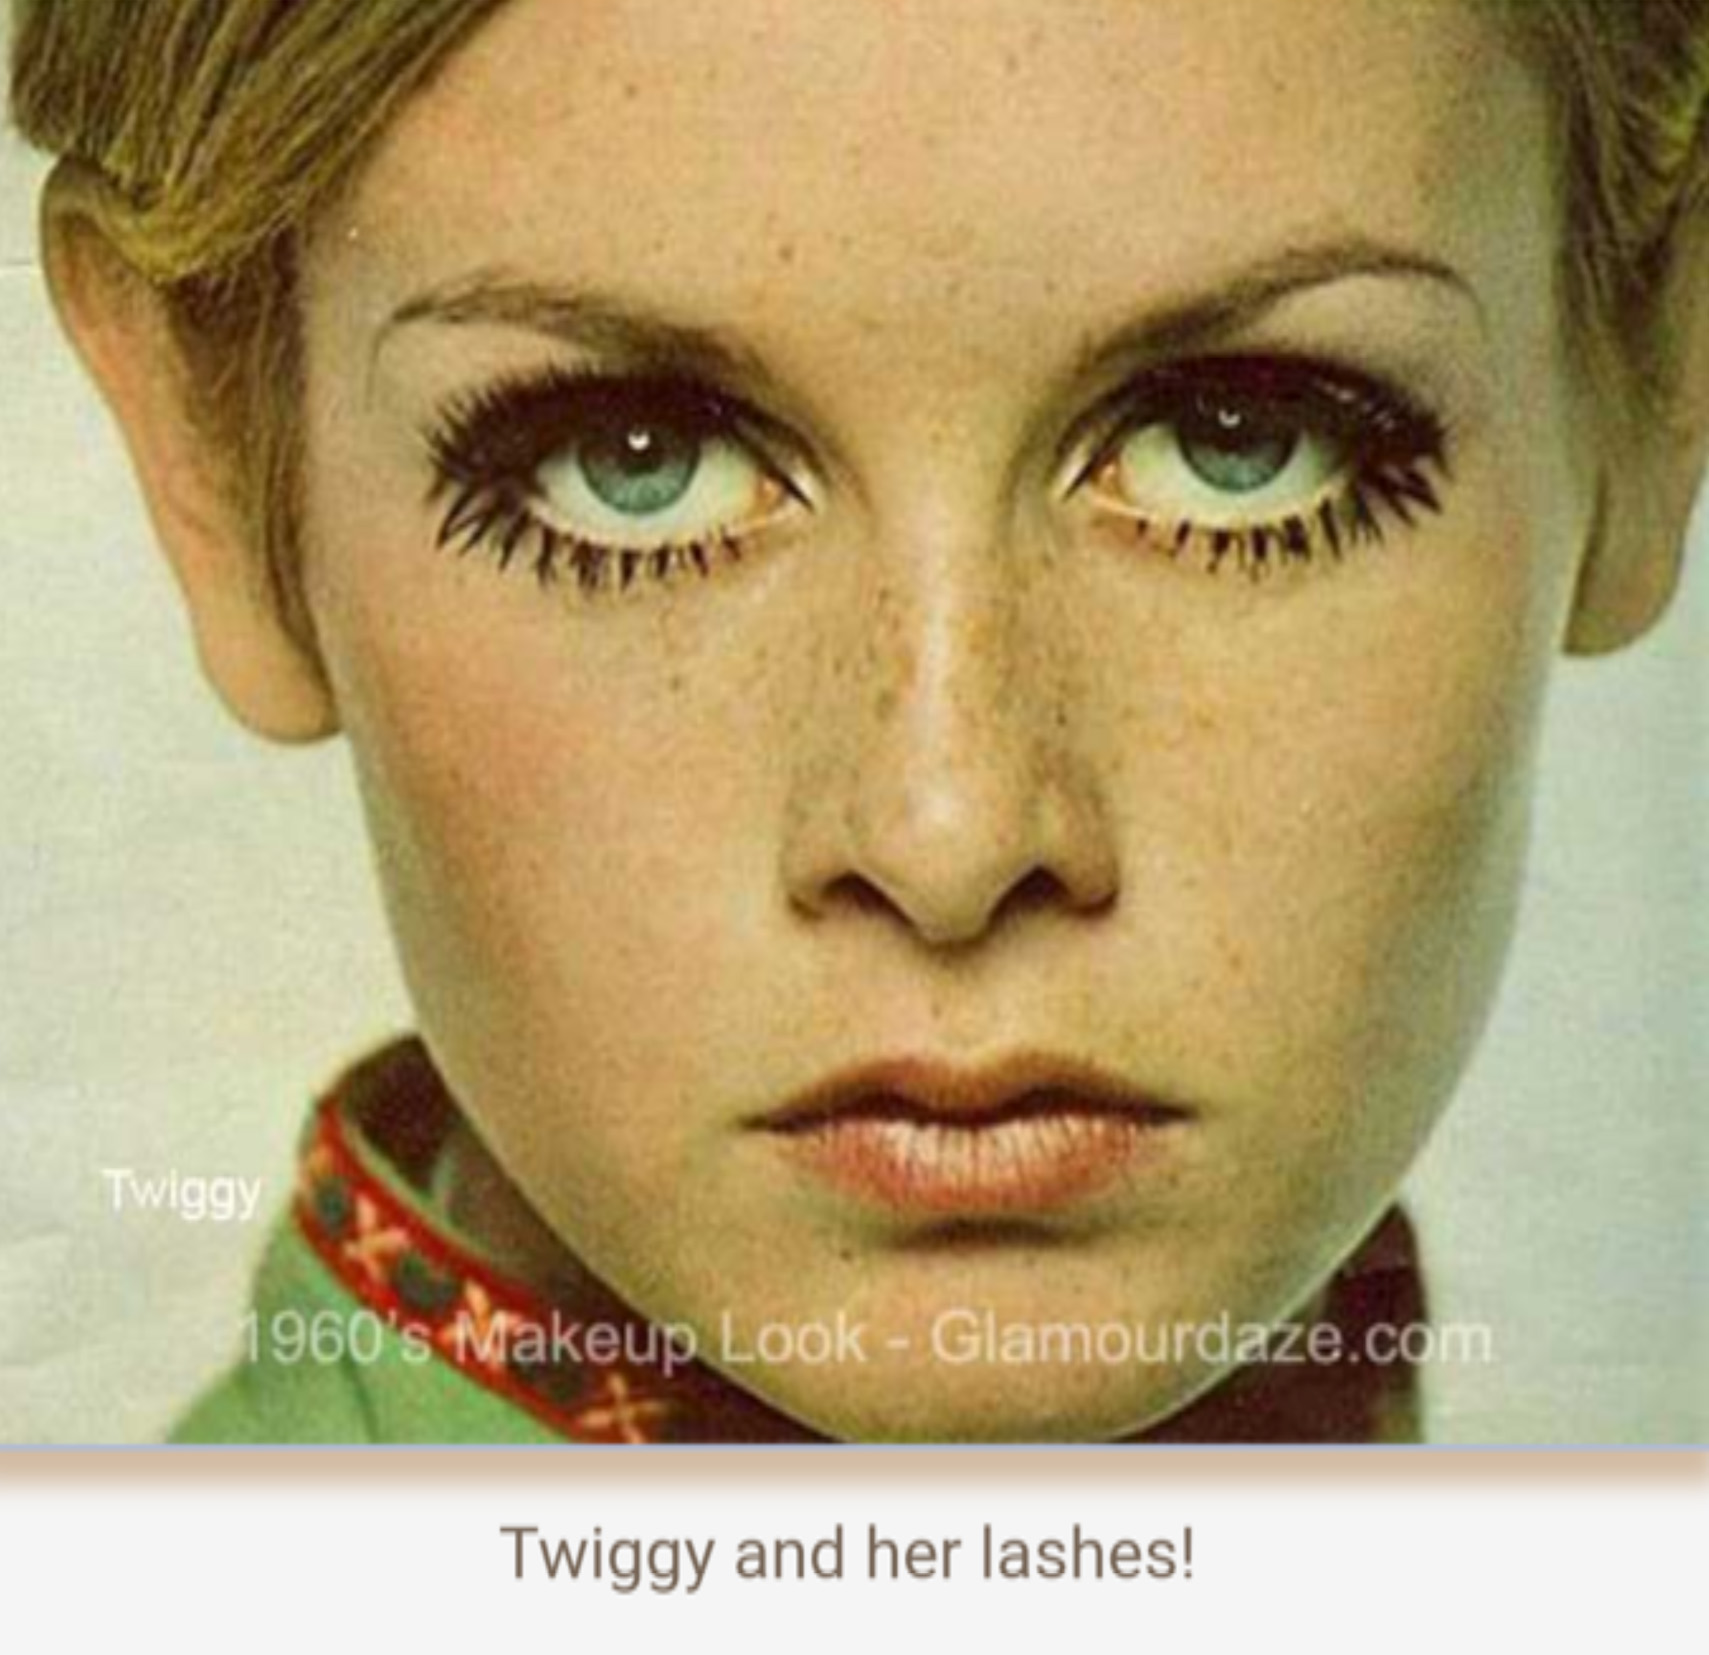 The makeup looks of 1960’s